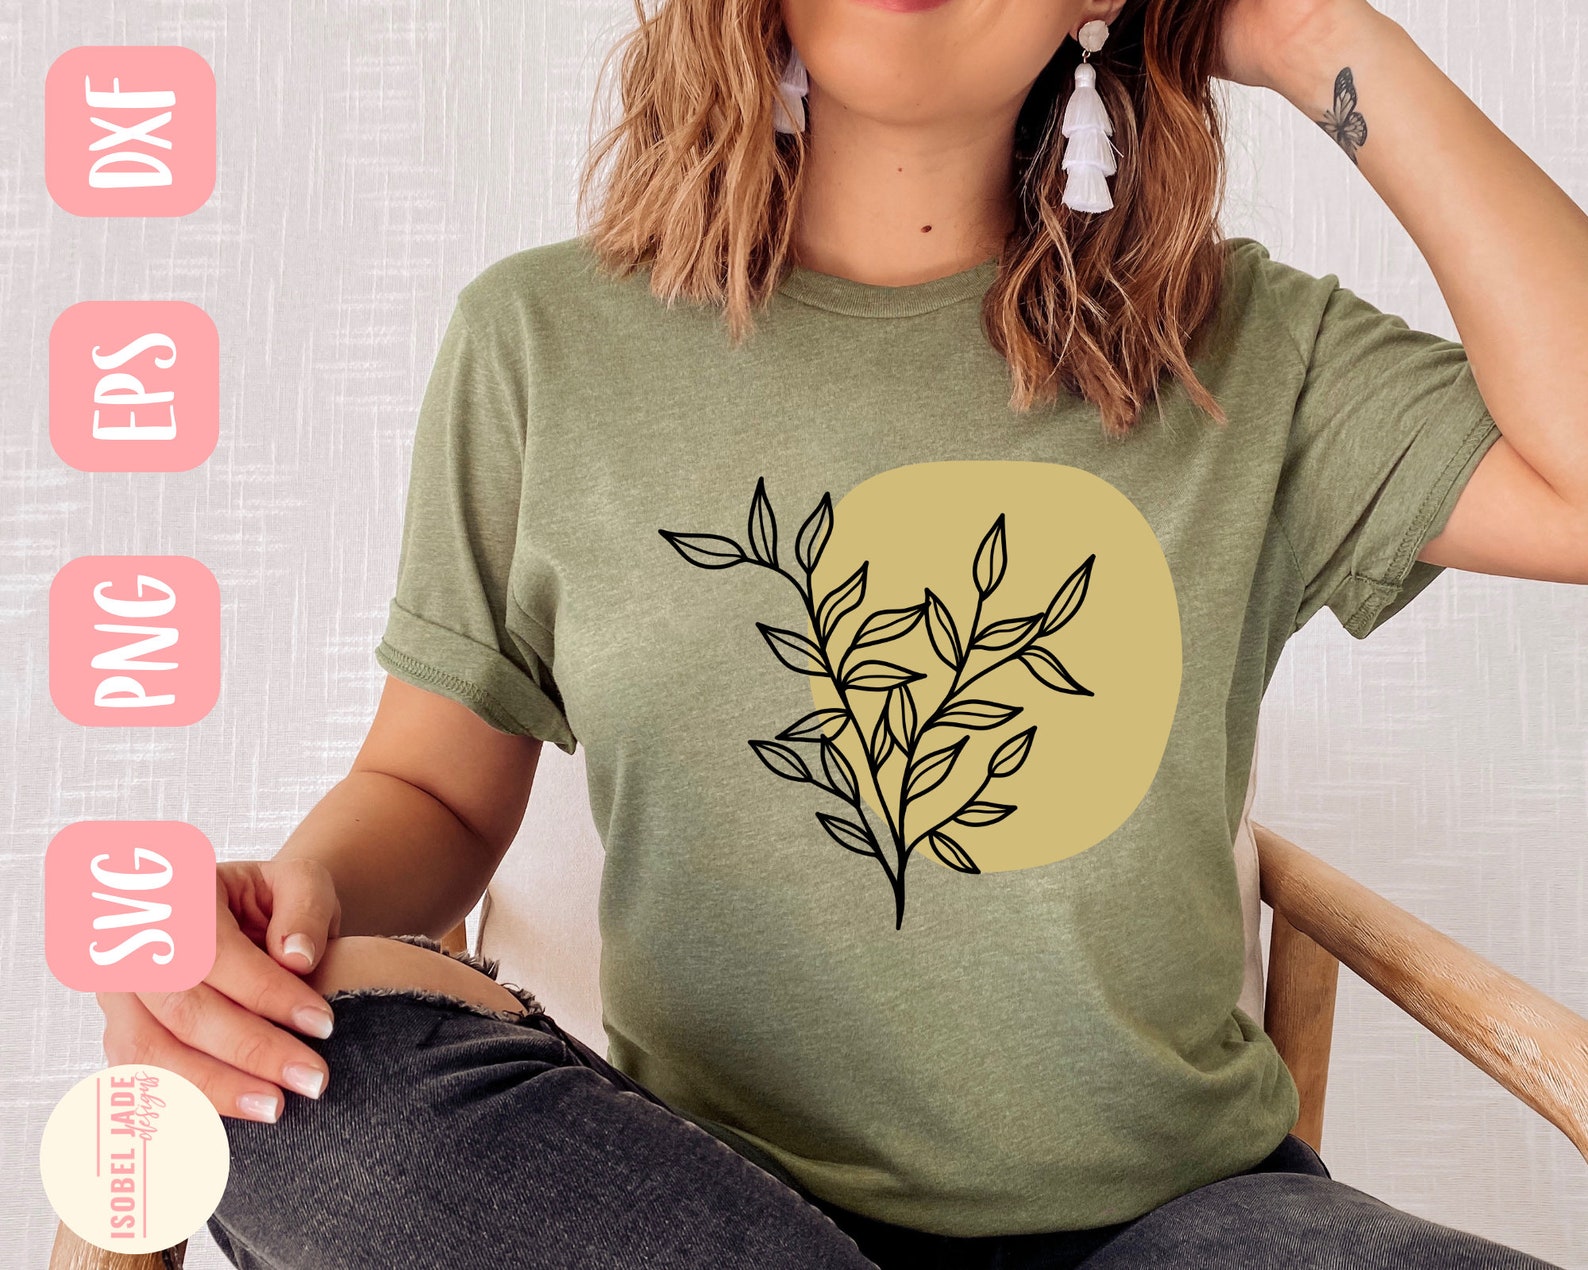 Olive t-shirt with print.